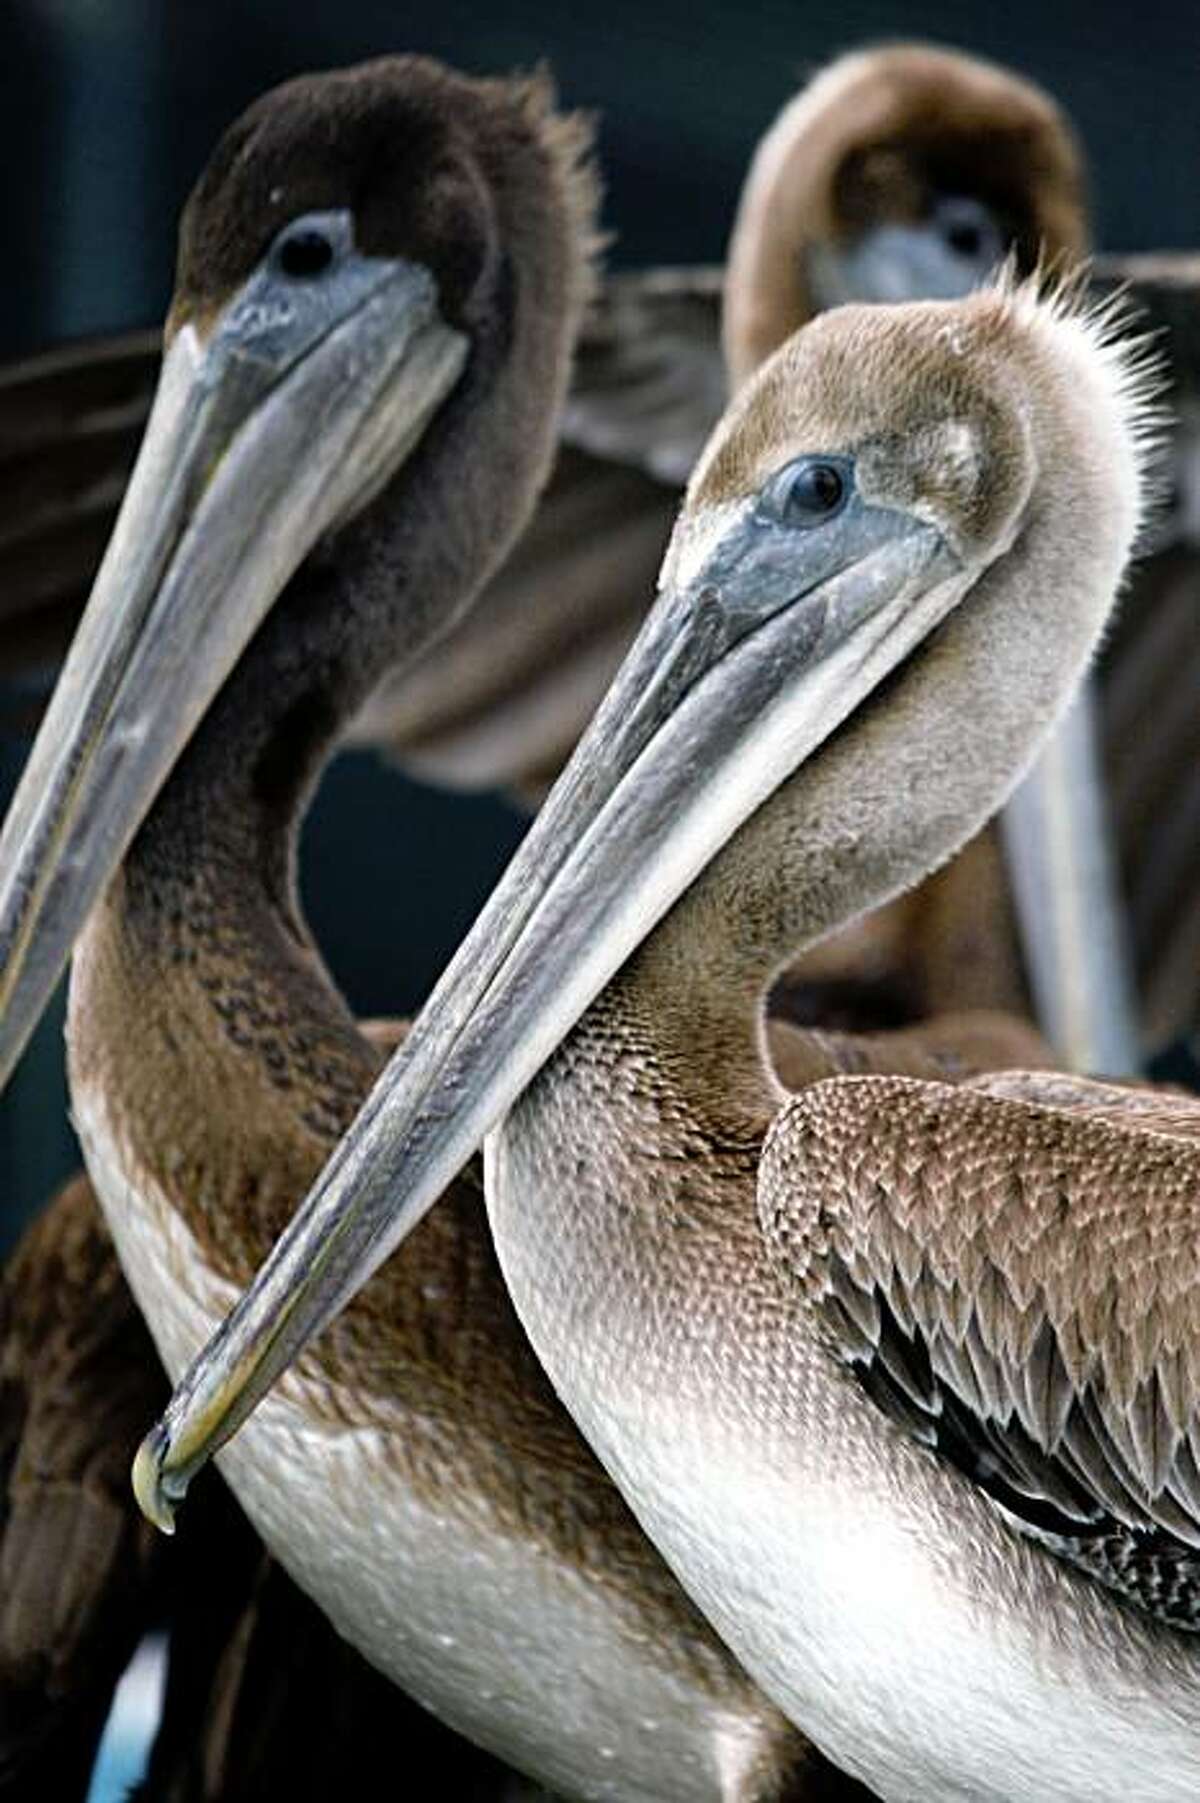 California brown pelicans are being treated at the International Bird Rescue Research Center in Cordelia, many have been operated on after ingesting fishing line with hooks attached or wrapped in the lines off Santa Cruz and Northern Calif waters before being rescued. This Saturday is the annual Coastal cleanup day, promoters of the one day event are hoping to remove some of the worst types of marine debris in the environment, all types plastic, fishing debris, and garbage. Photographed in Cordelia Tuesday Sept 16, 2008.